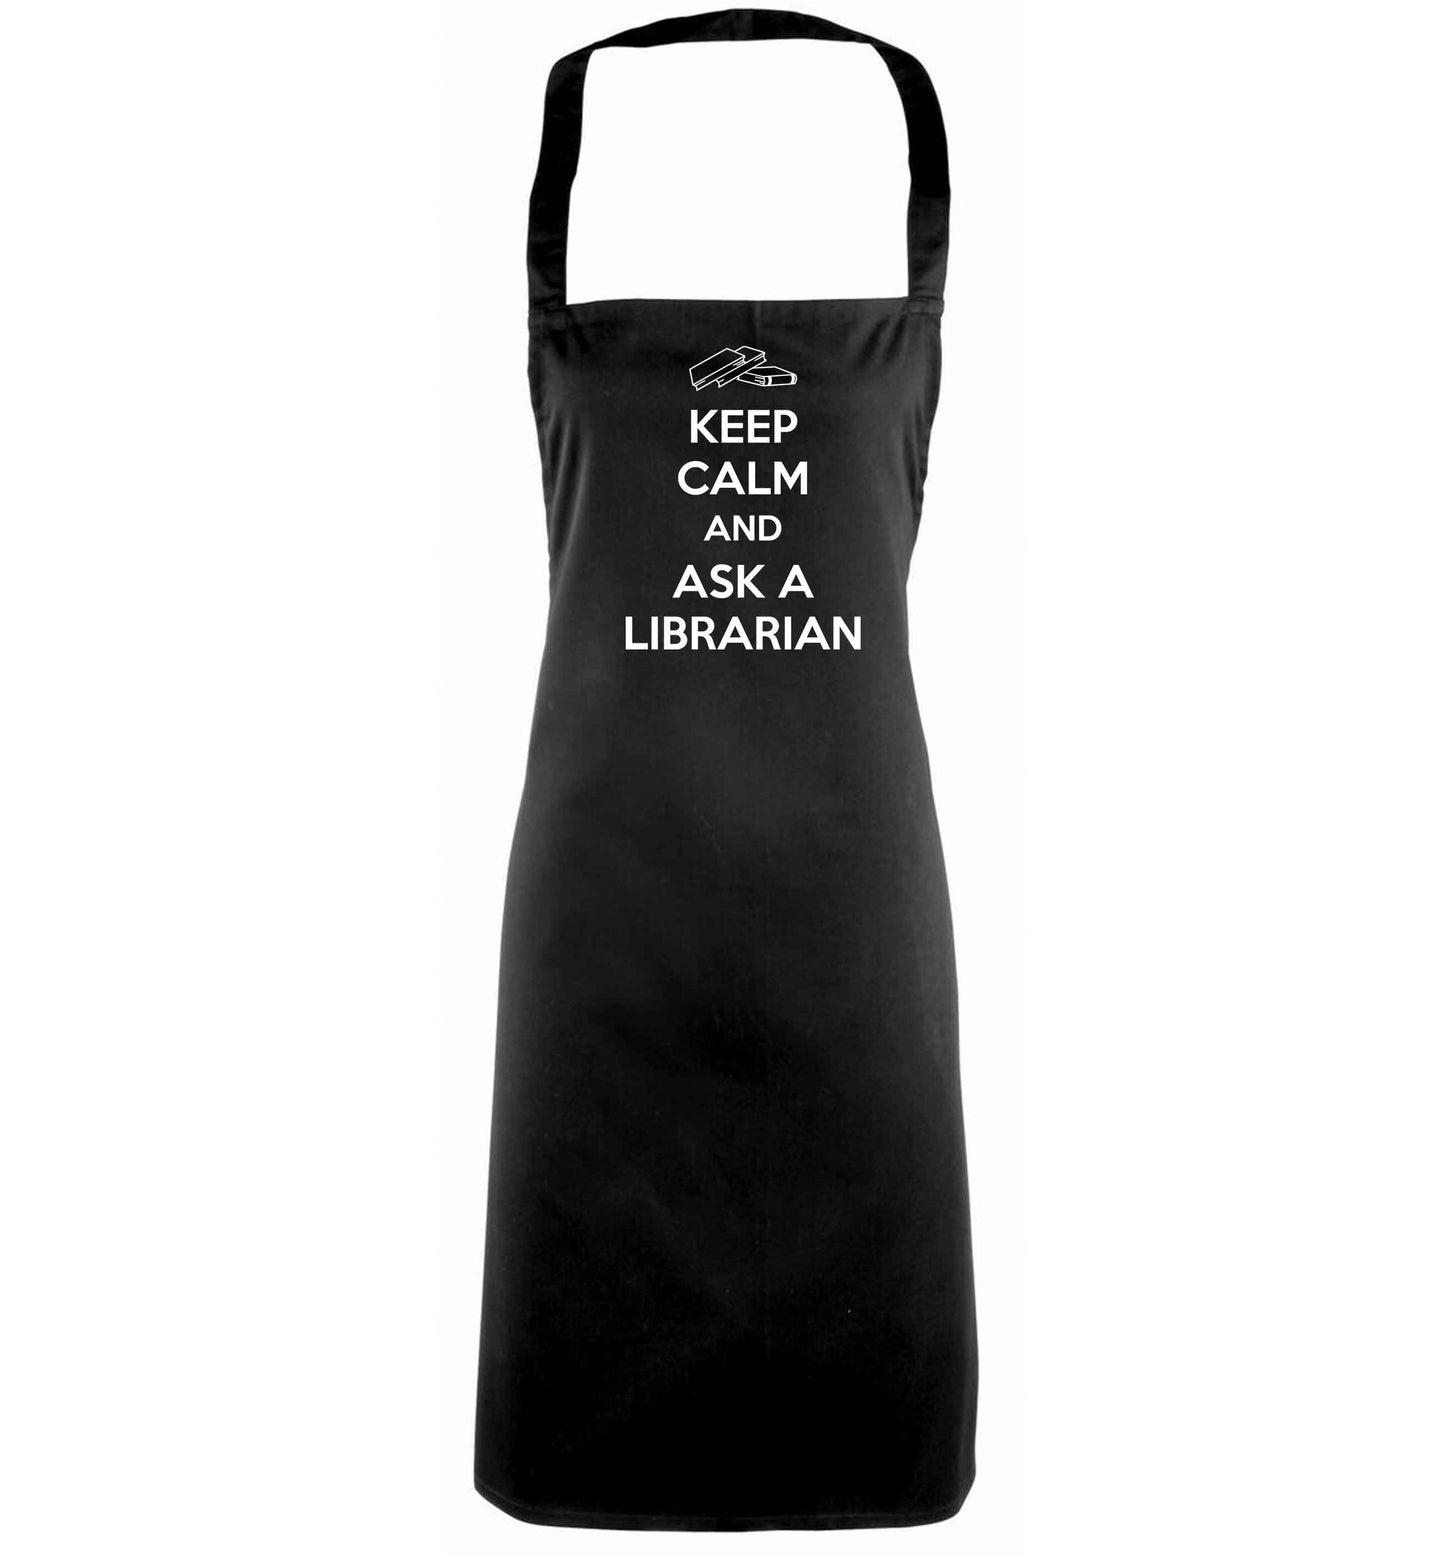 Keep calm and ask a librarian black apron